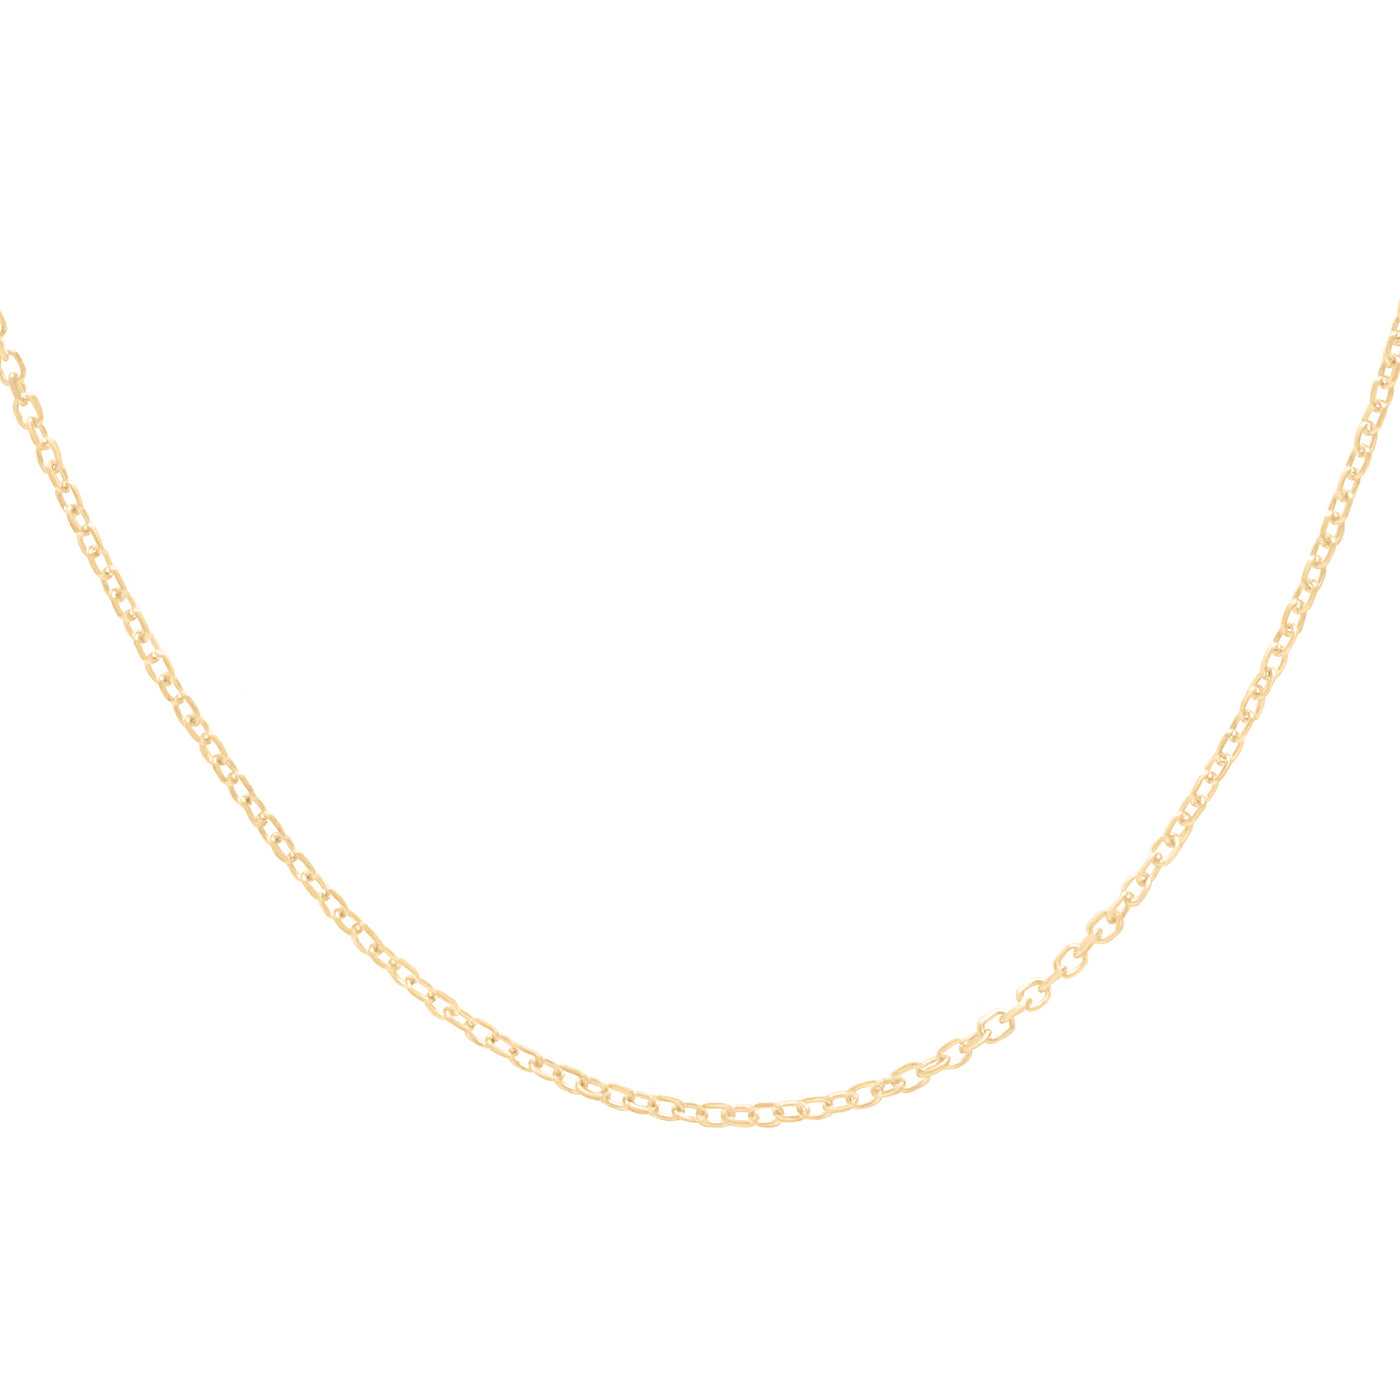 Cable chain yellow gold on white background